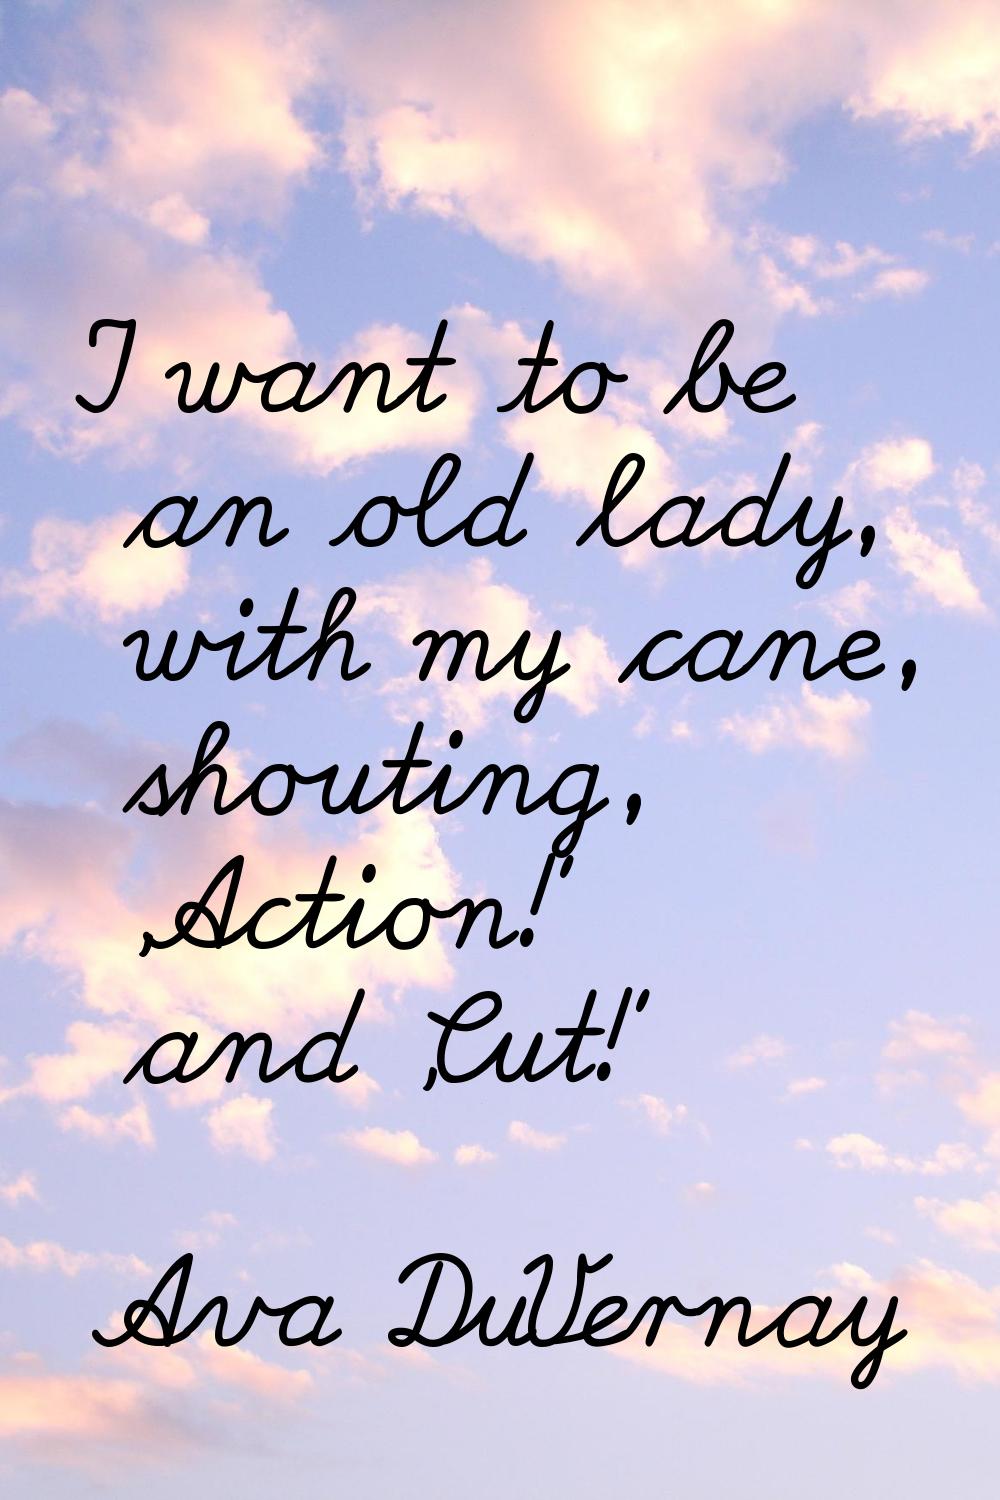 I want to be an old lady, with my cane, shouting, 'Action!' and 'Cut!'